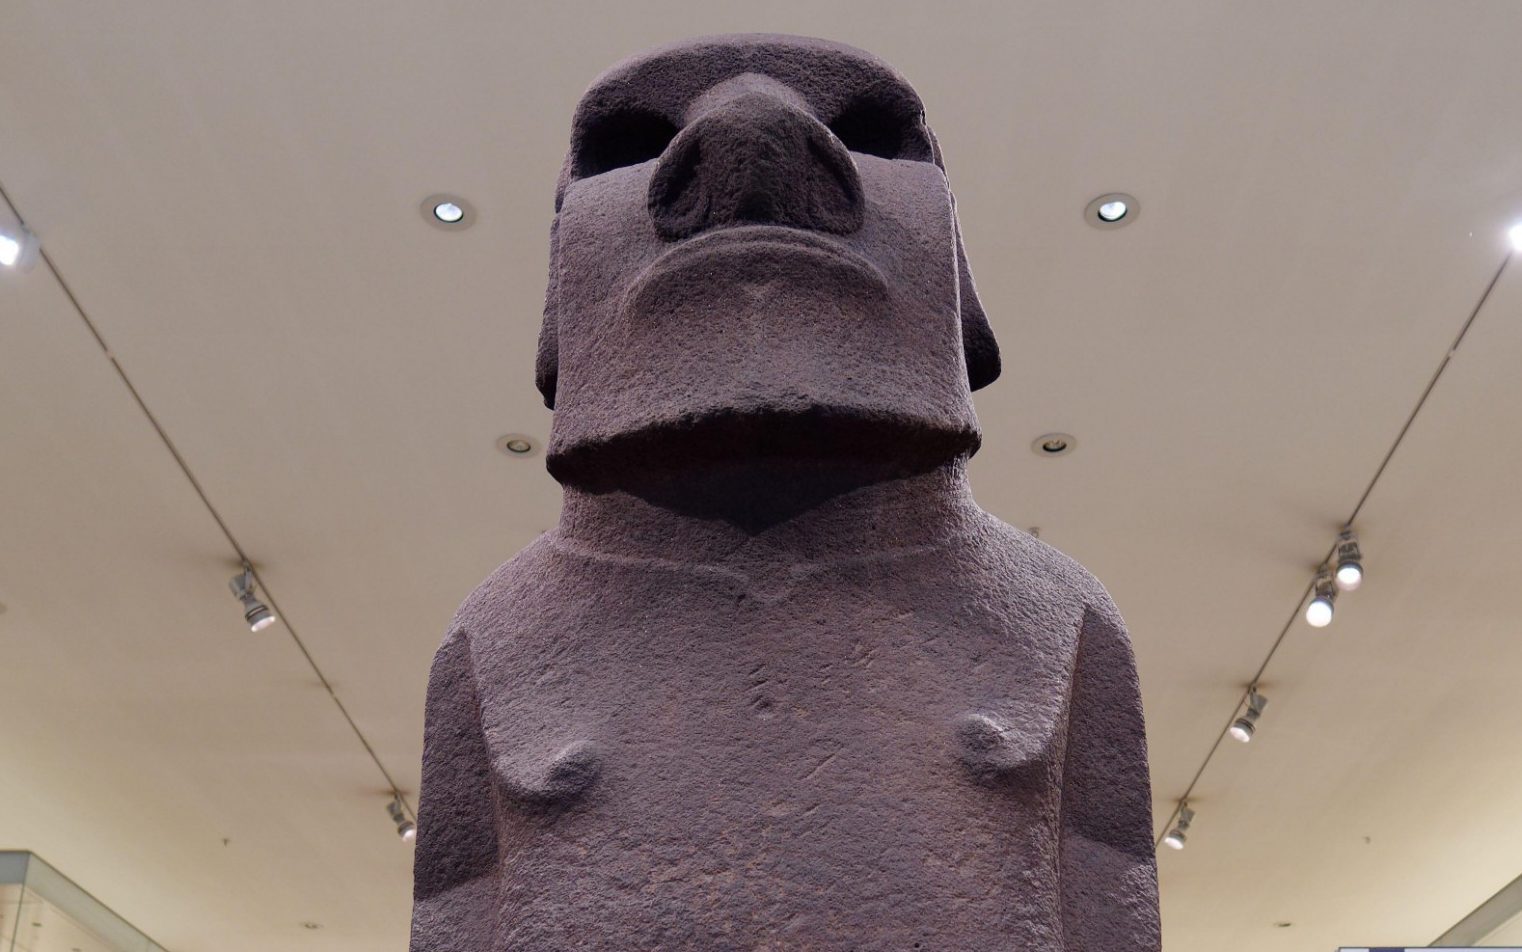 british museum targeted by chilean social media campaign over easter island statues